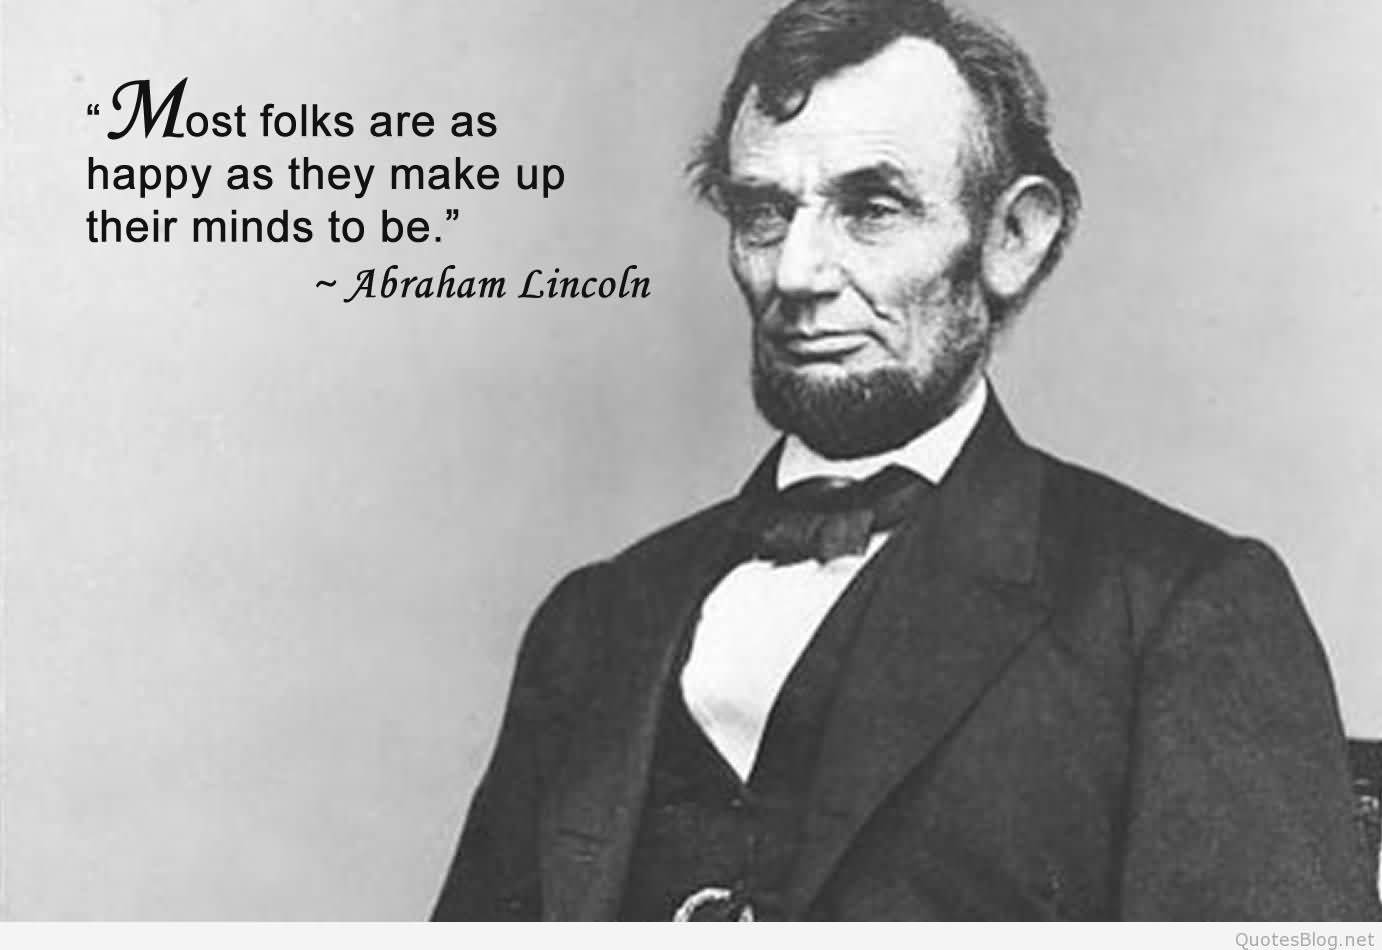 Abe Lincoln Quotes On Life 20